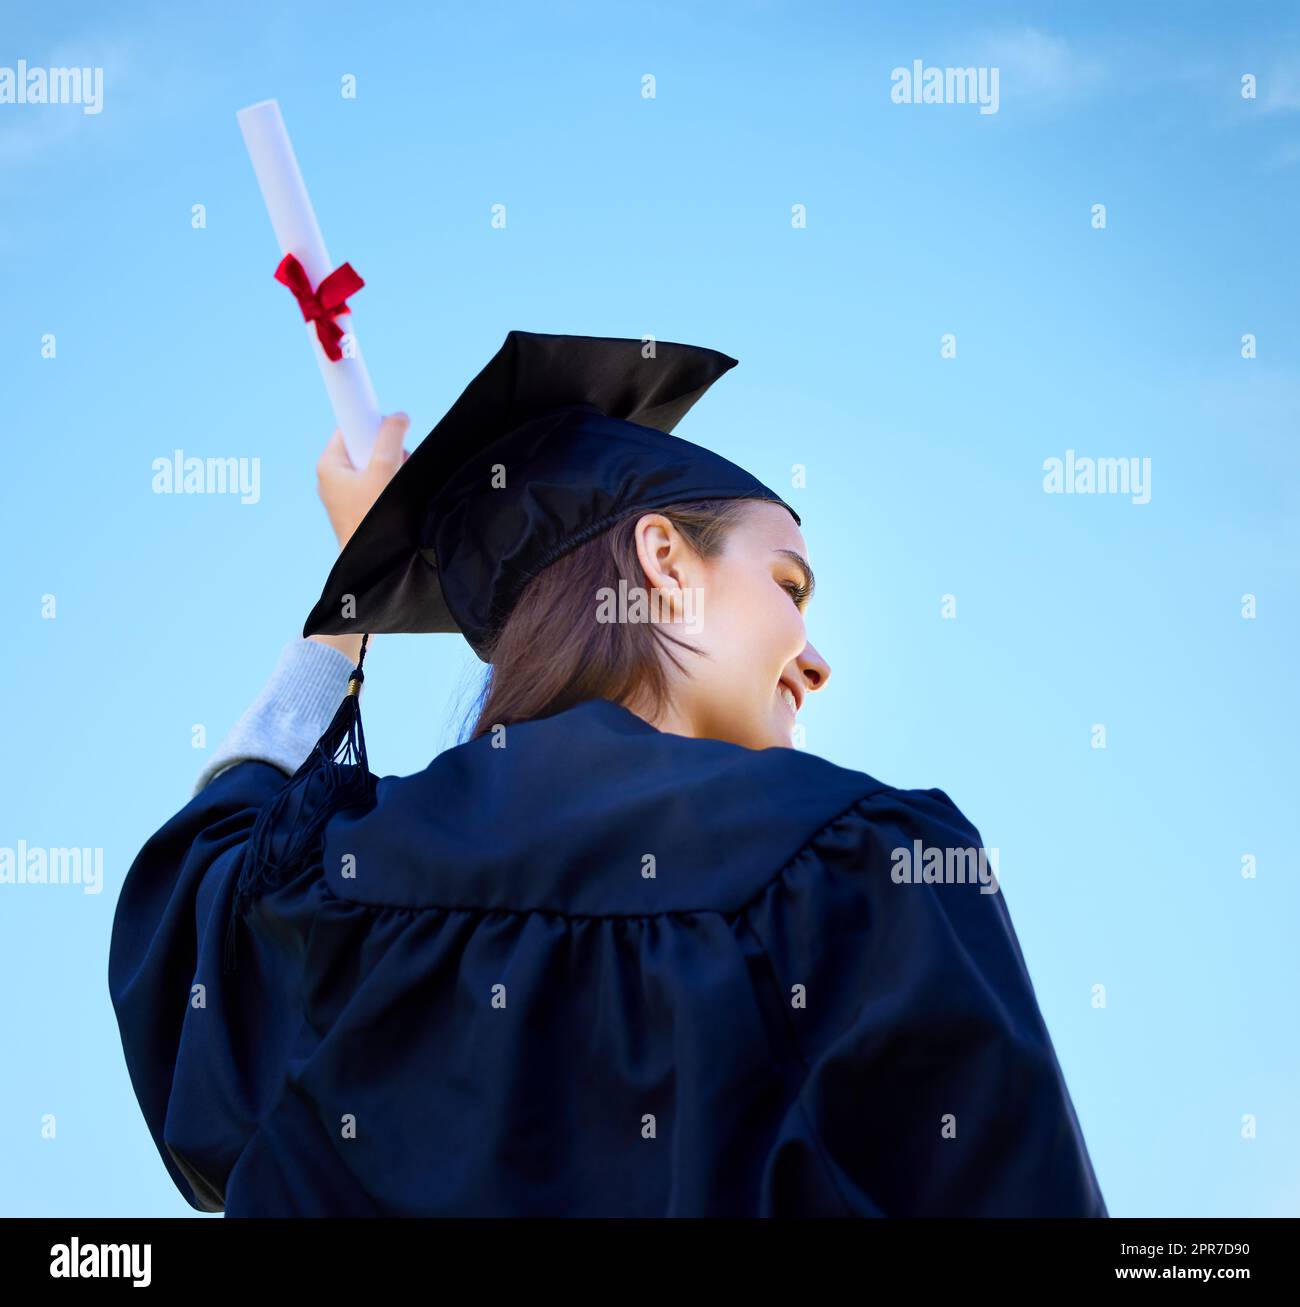 Set sail towards your dreams. Low angle shot of a young woman cheering with her diploma on graduation day. Stock Photo